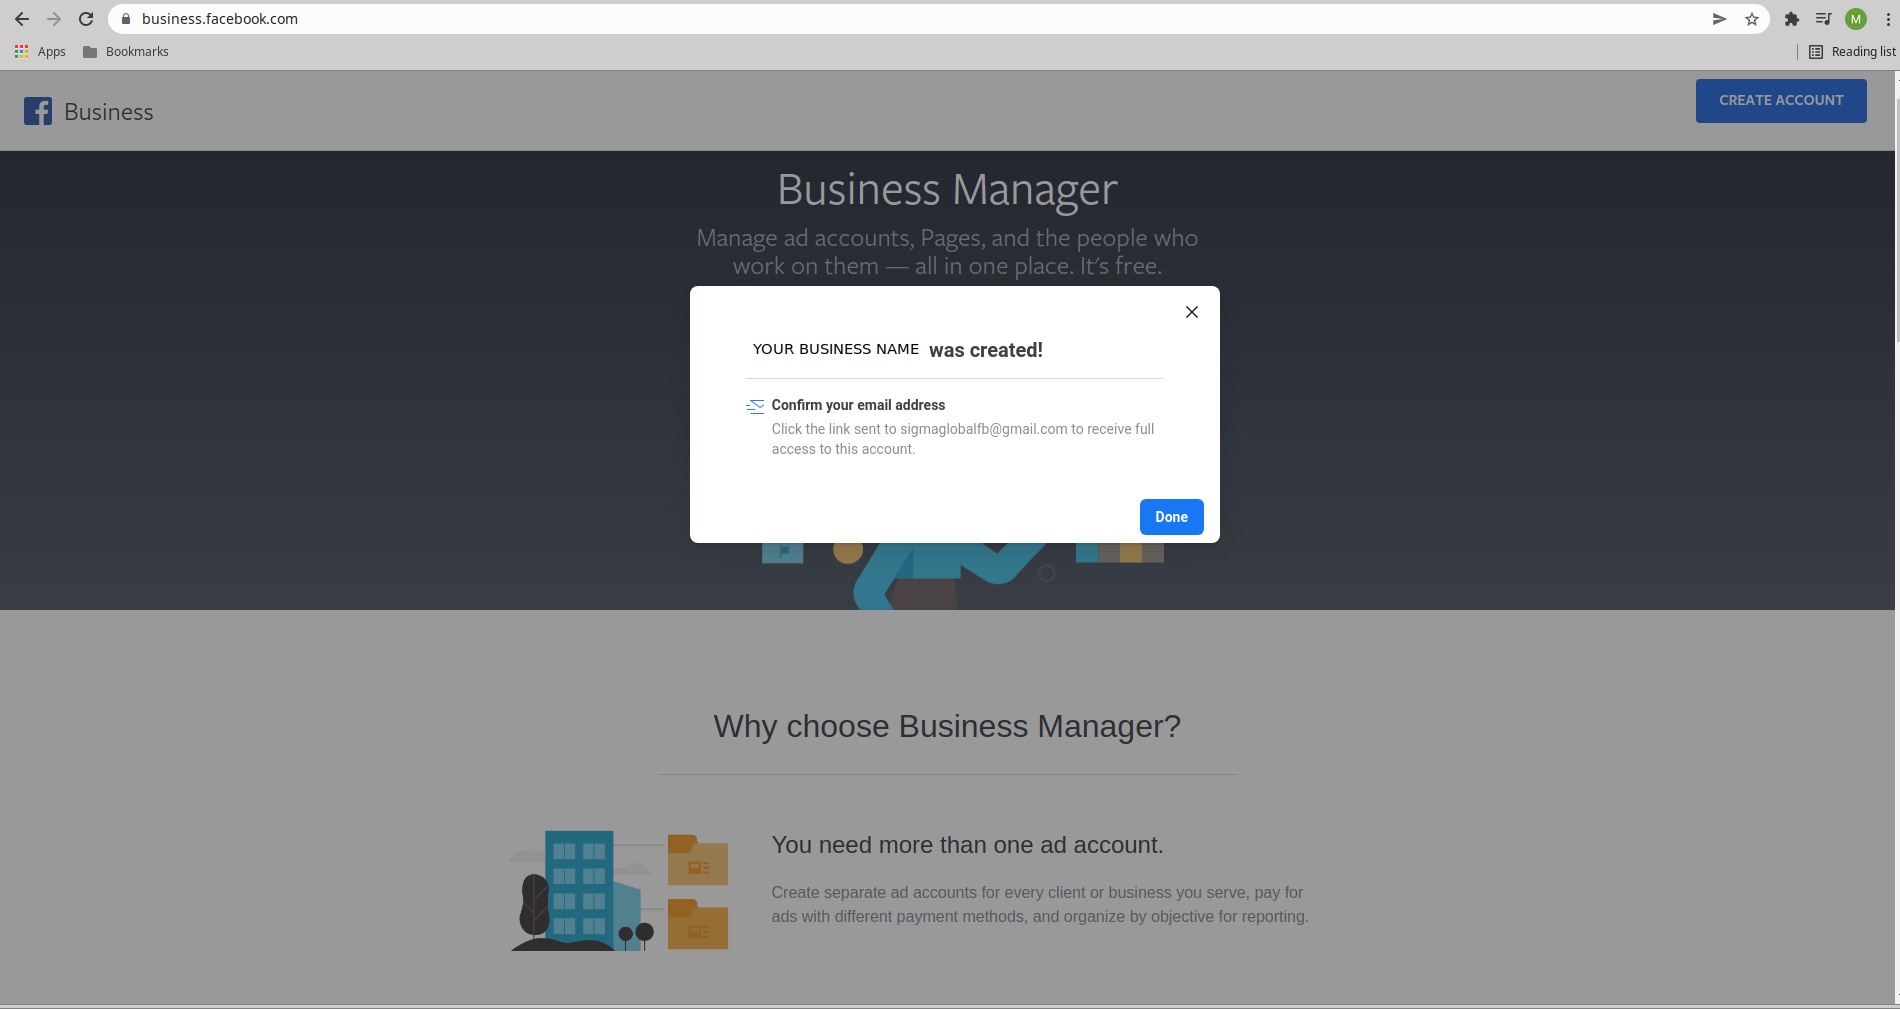 How to Use Facebook Business Manager: A Step-by-Step Guide